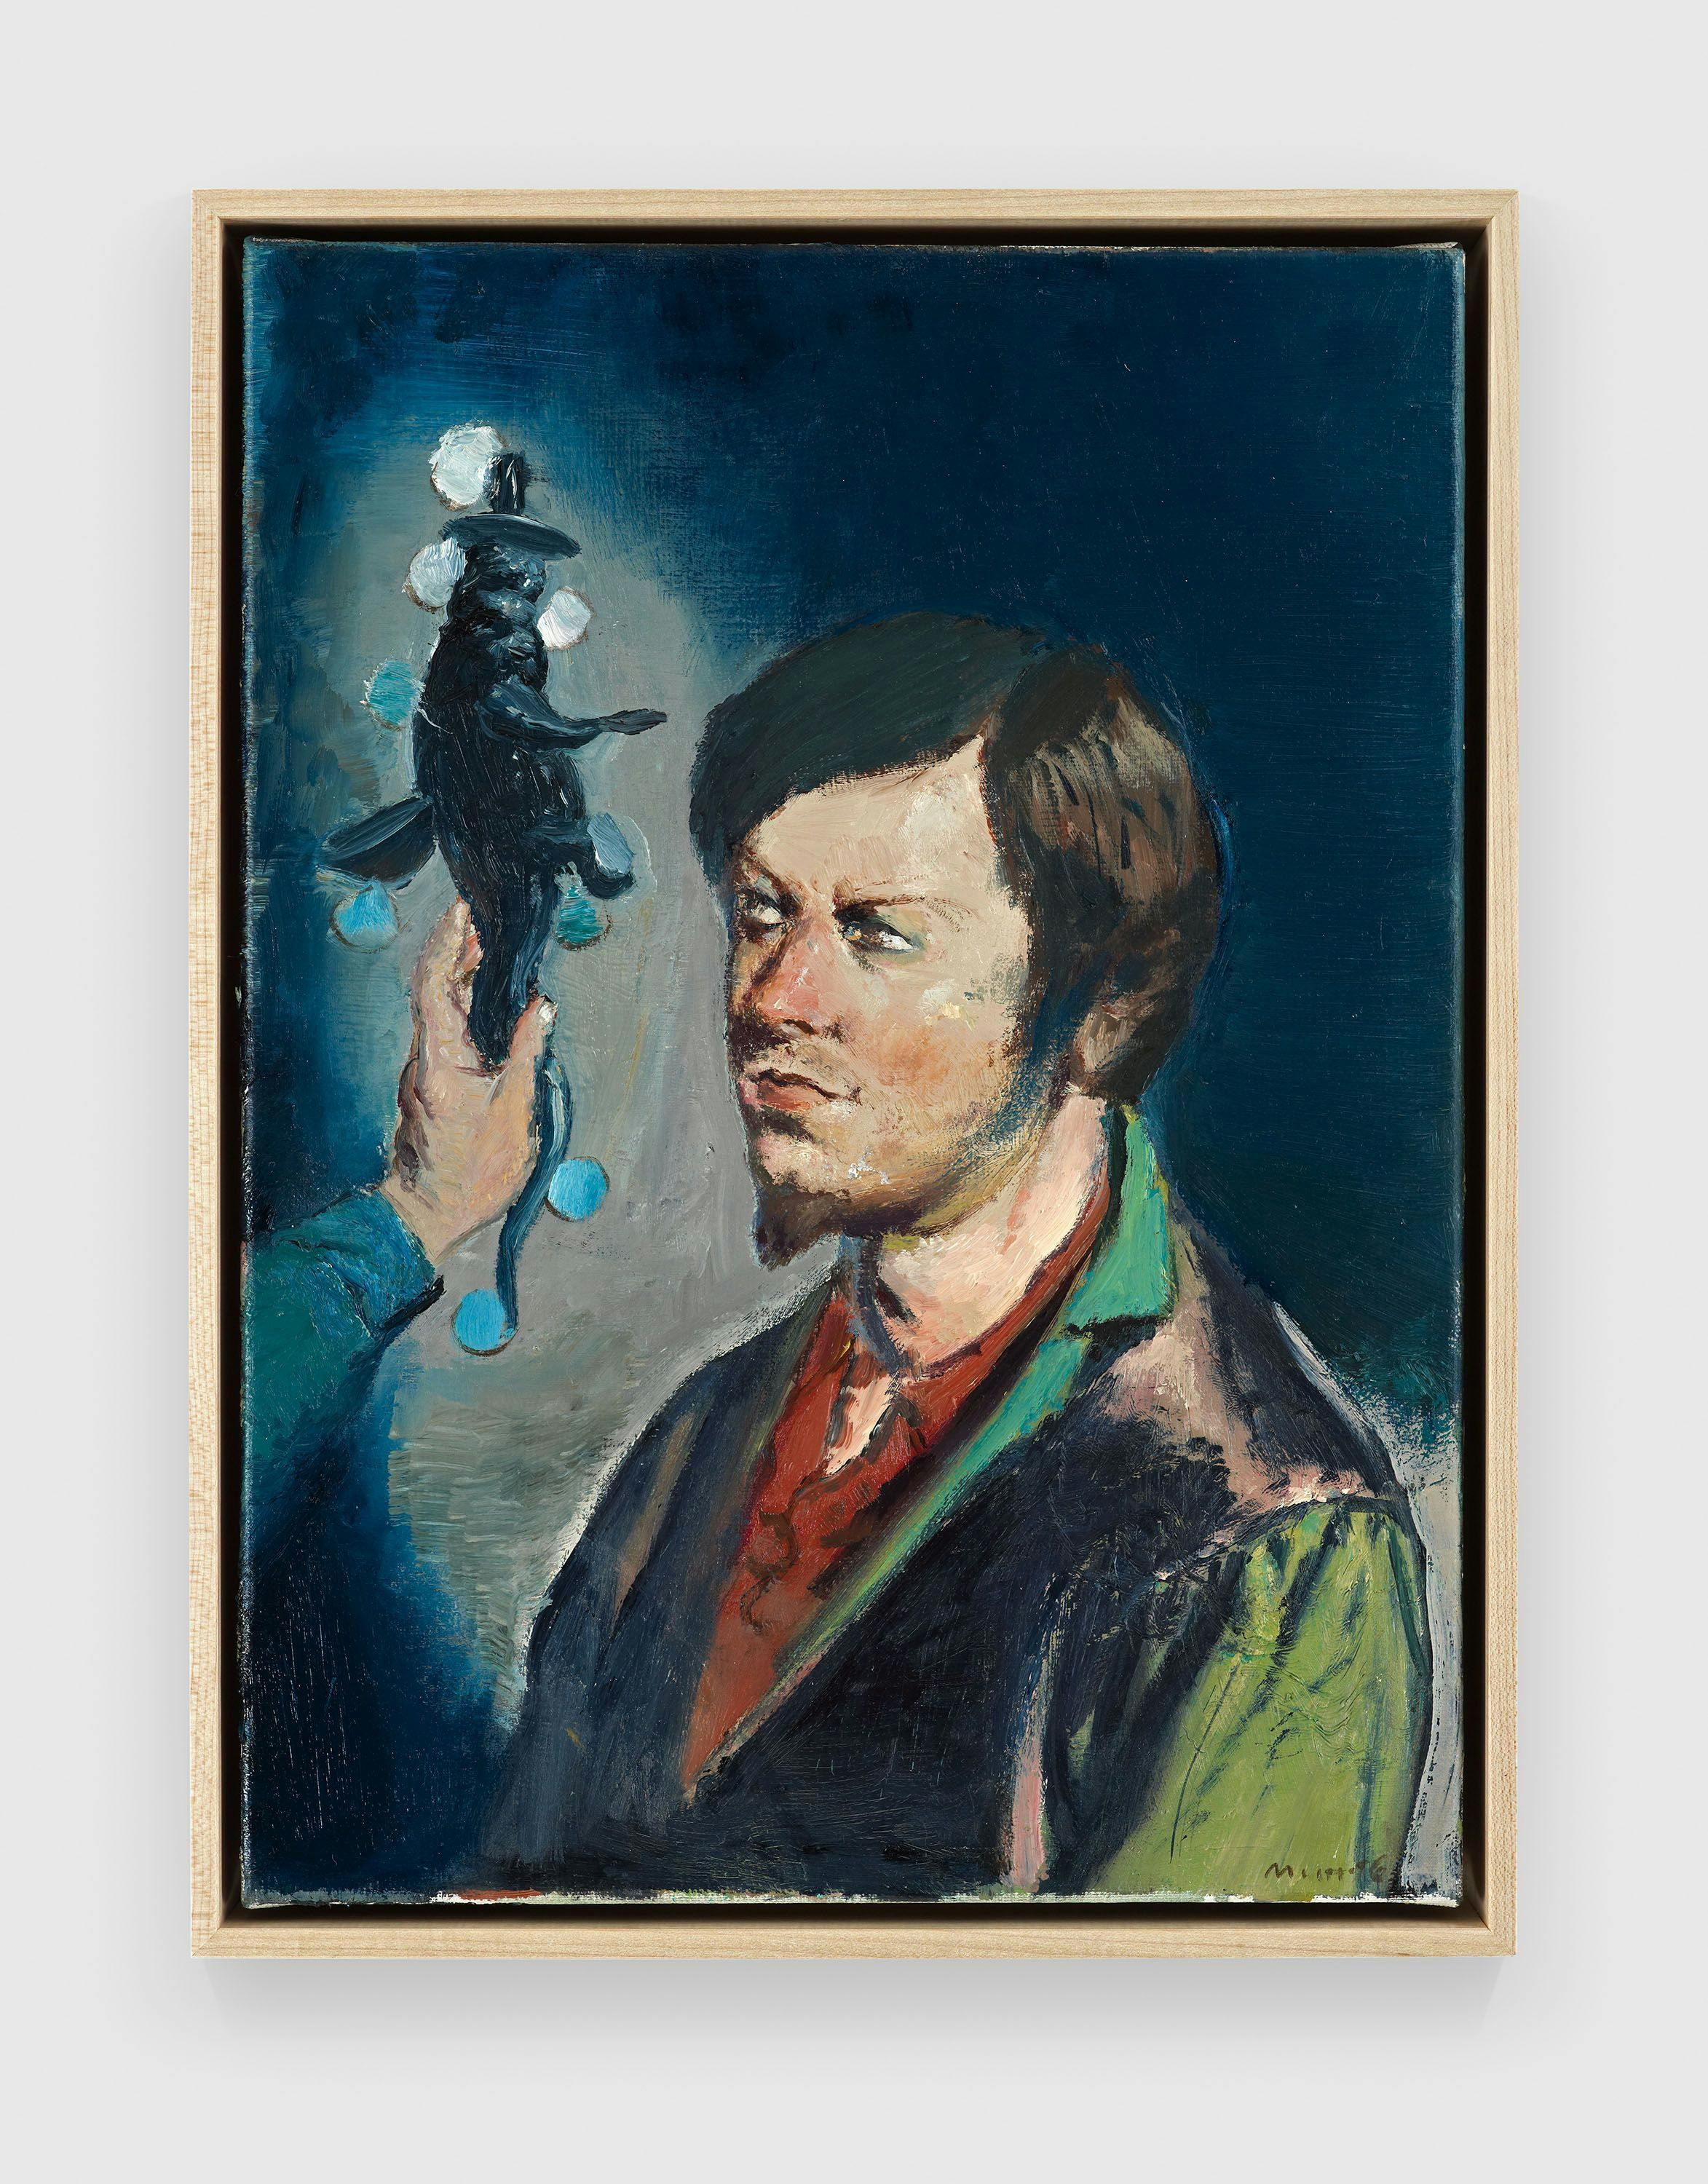 A painting by Neo Rauch, titled Das Teermännchen, dated 2016.